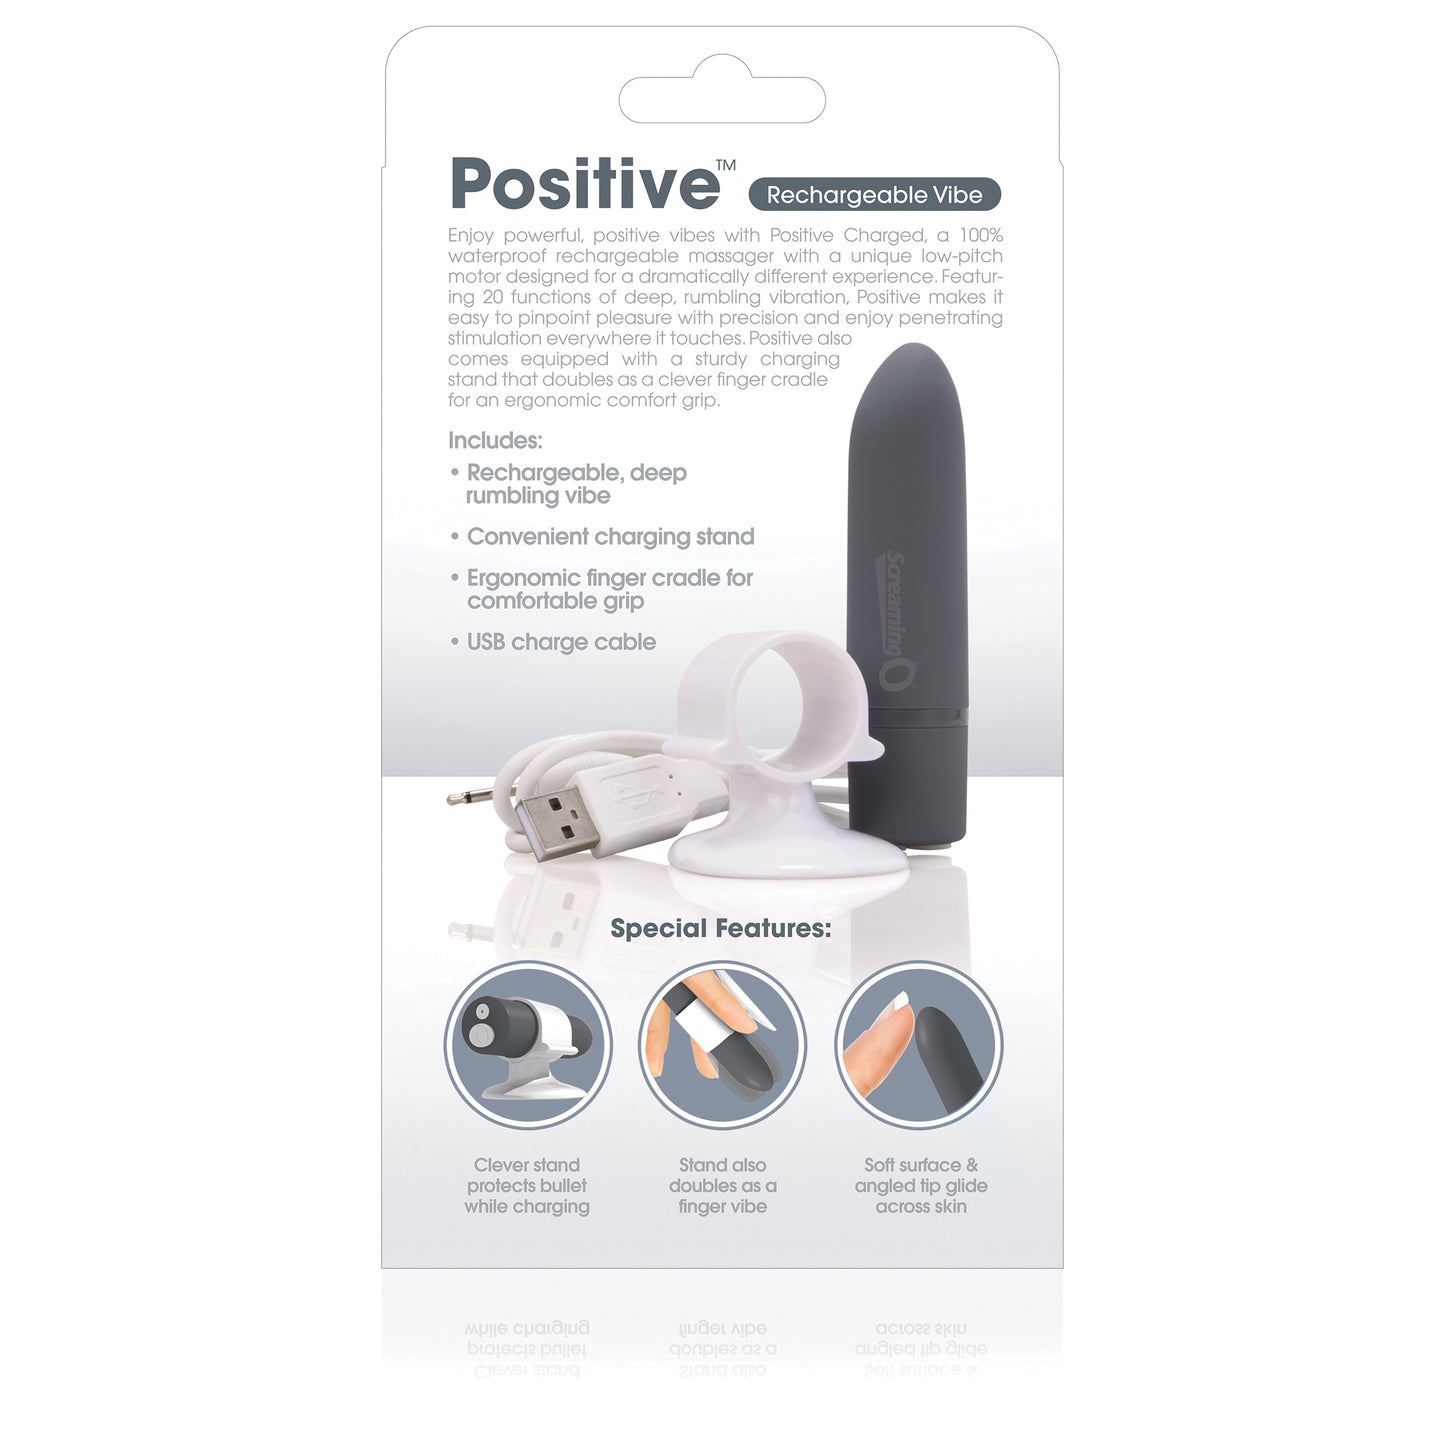 Charged Positive Rechargeable Vibe - Grey APV-G-101E